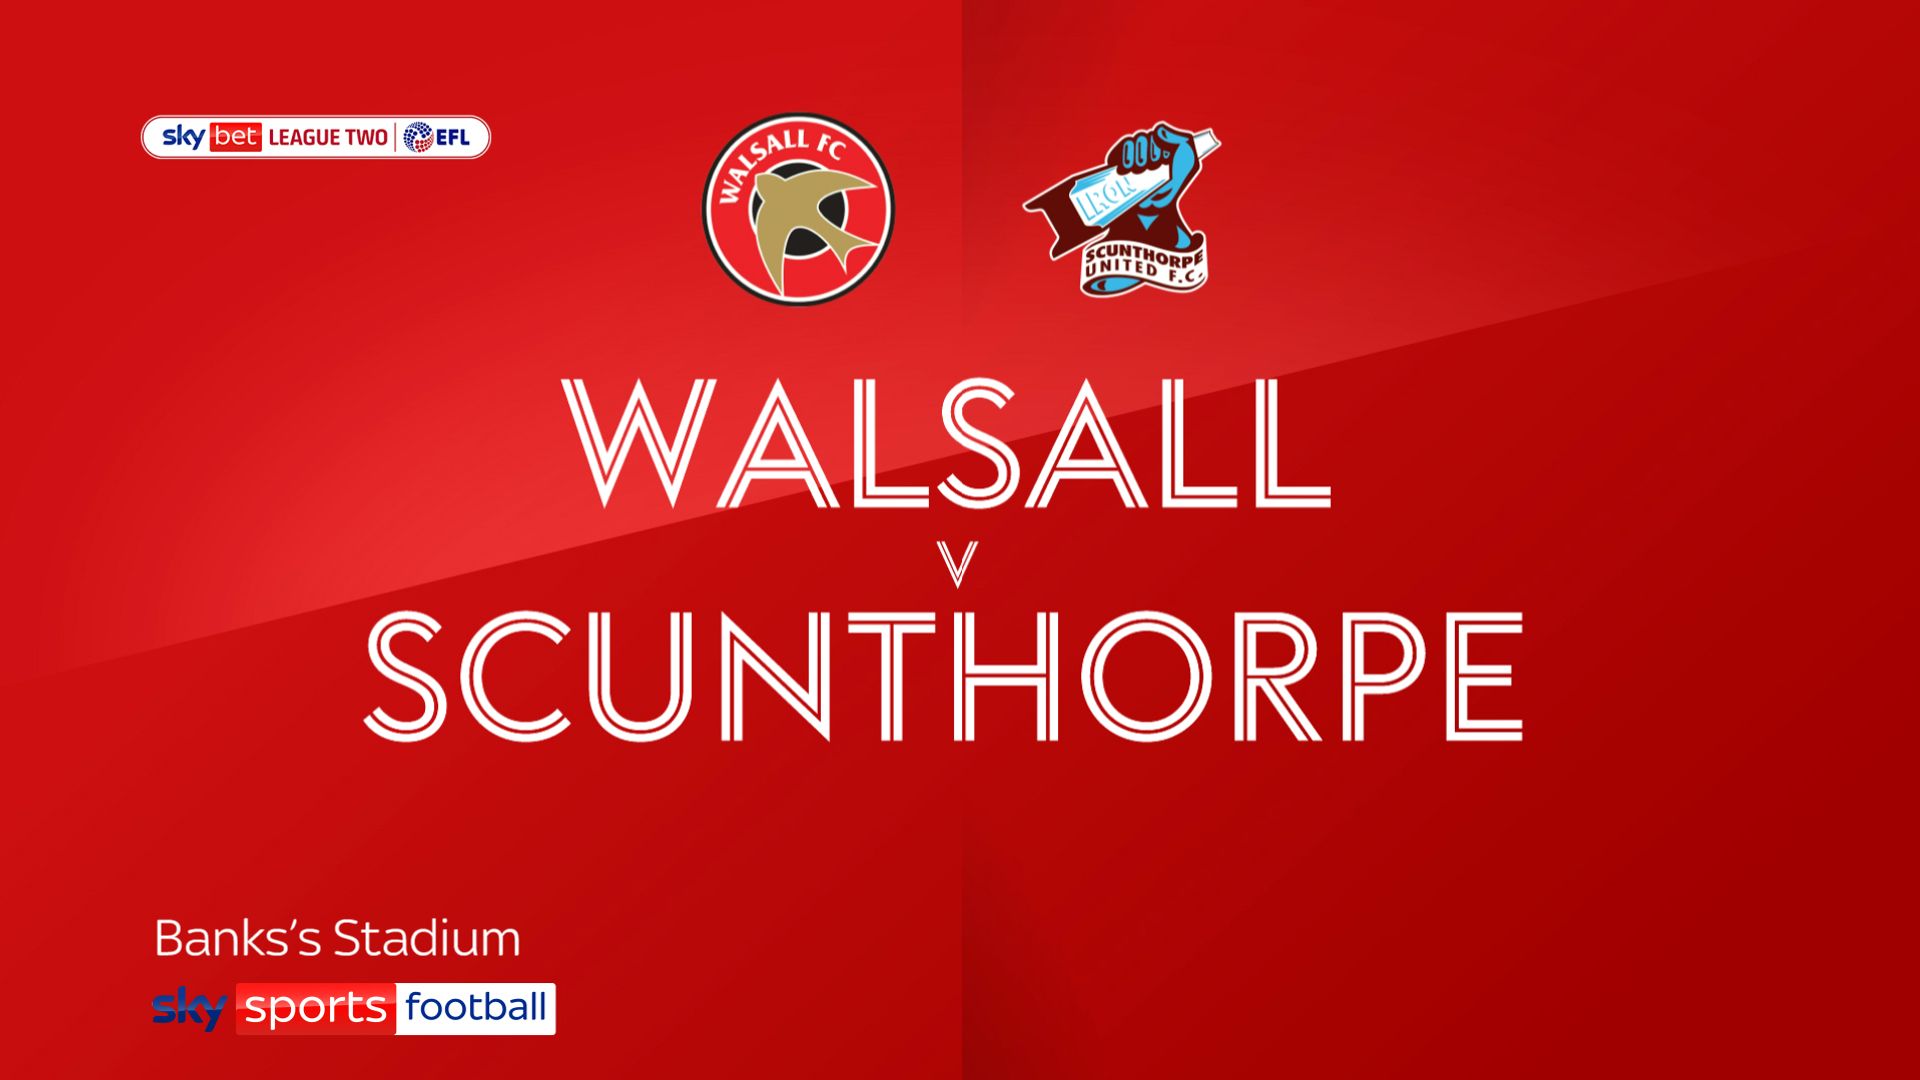 Walsall 1 – 1 Scunthorpe